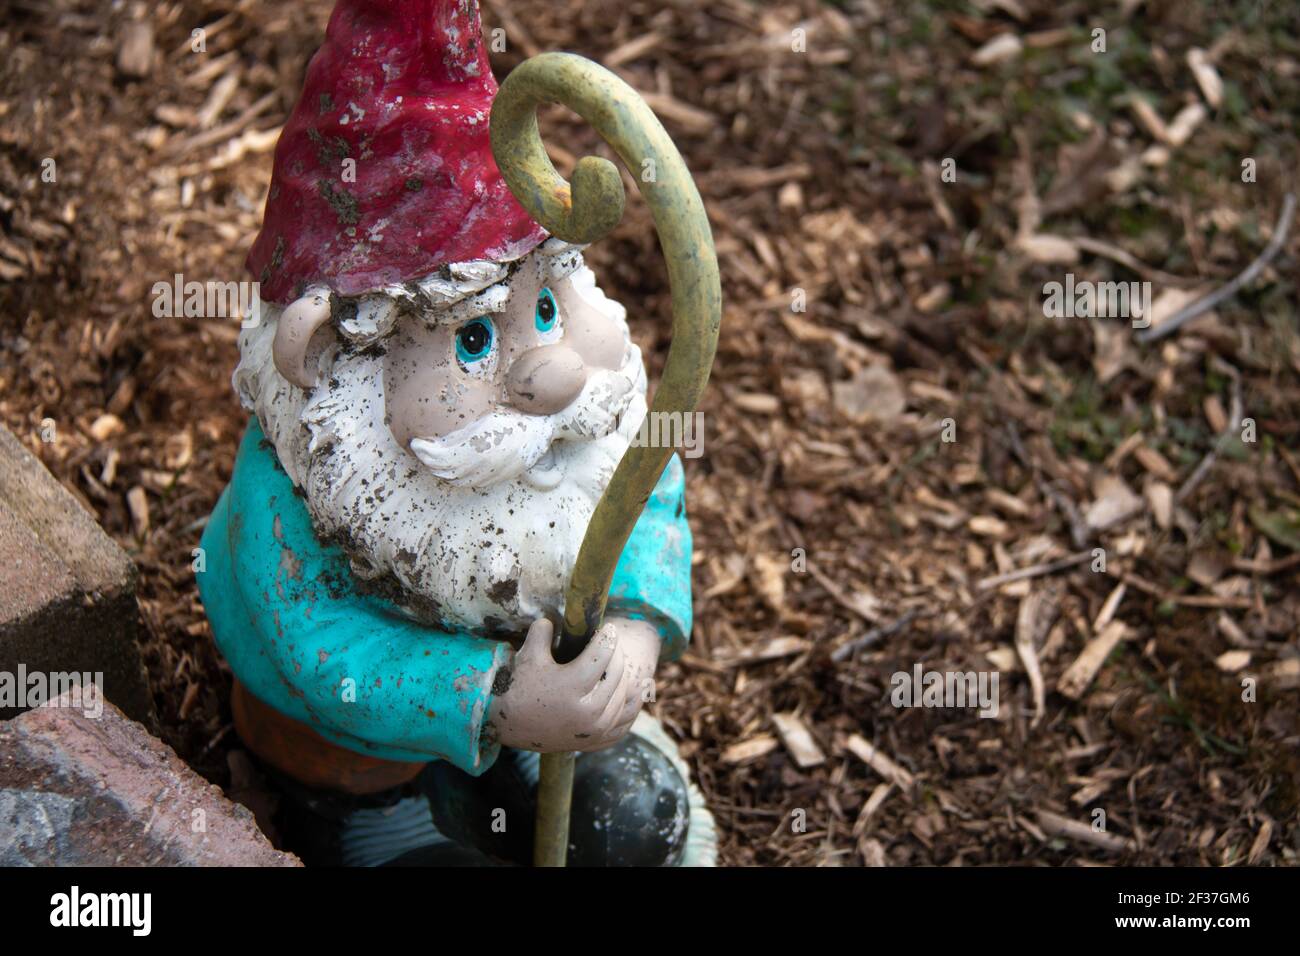 A cute garden gnome wearing a turquoise jacket and a red cap, holding a long gold staff on top soil in a garden in Ontario, Canada, 2021. Stock Photo